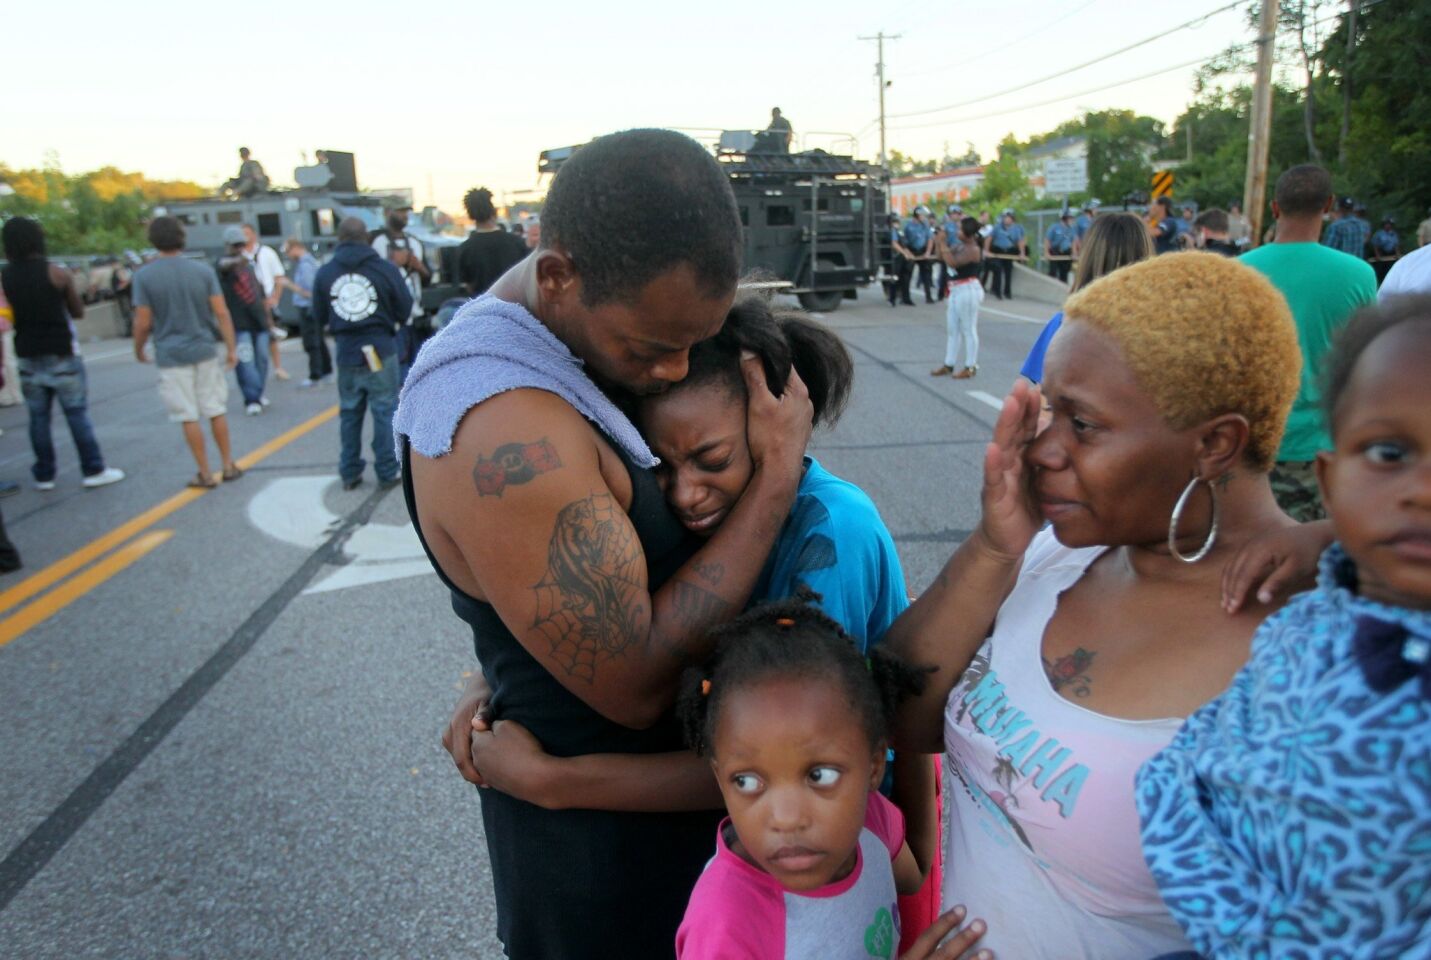 The Williams family is overcome with emotion after Terrell Williams El, left, confronted police. "I'm out here to stand for my children and their future," said Williams El.